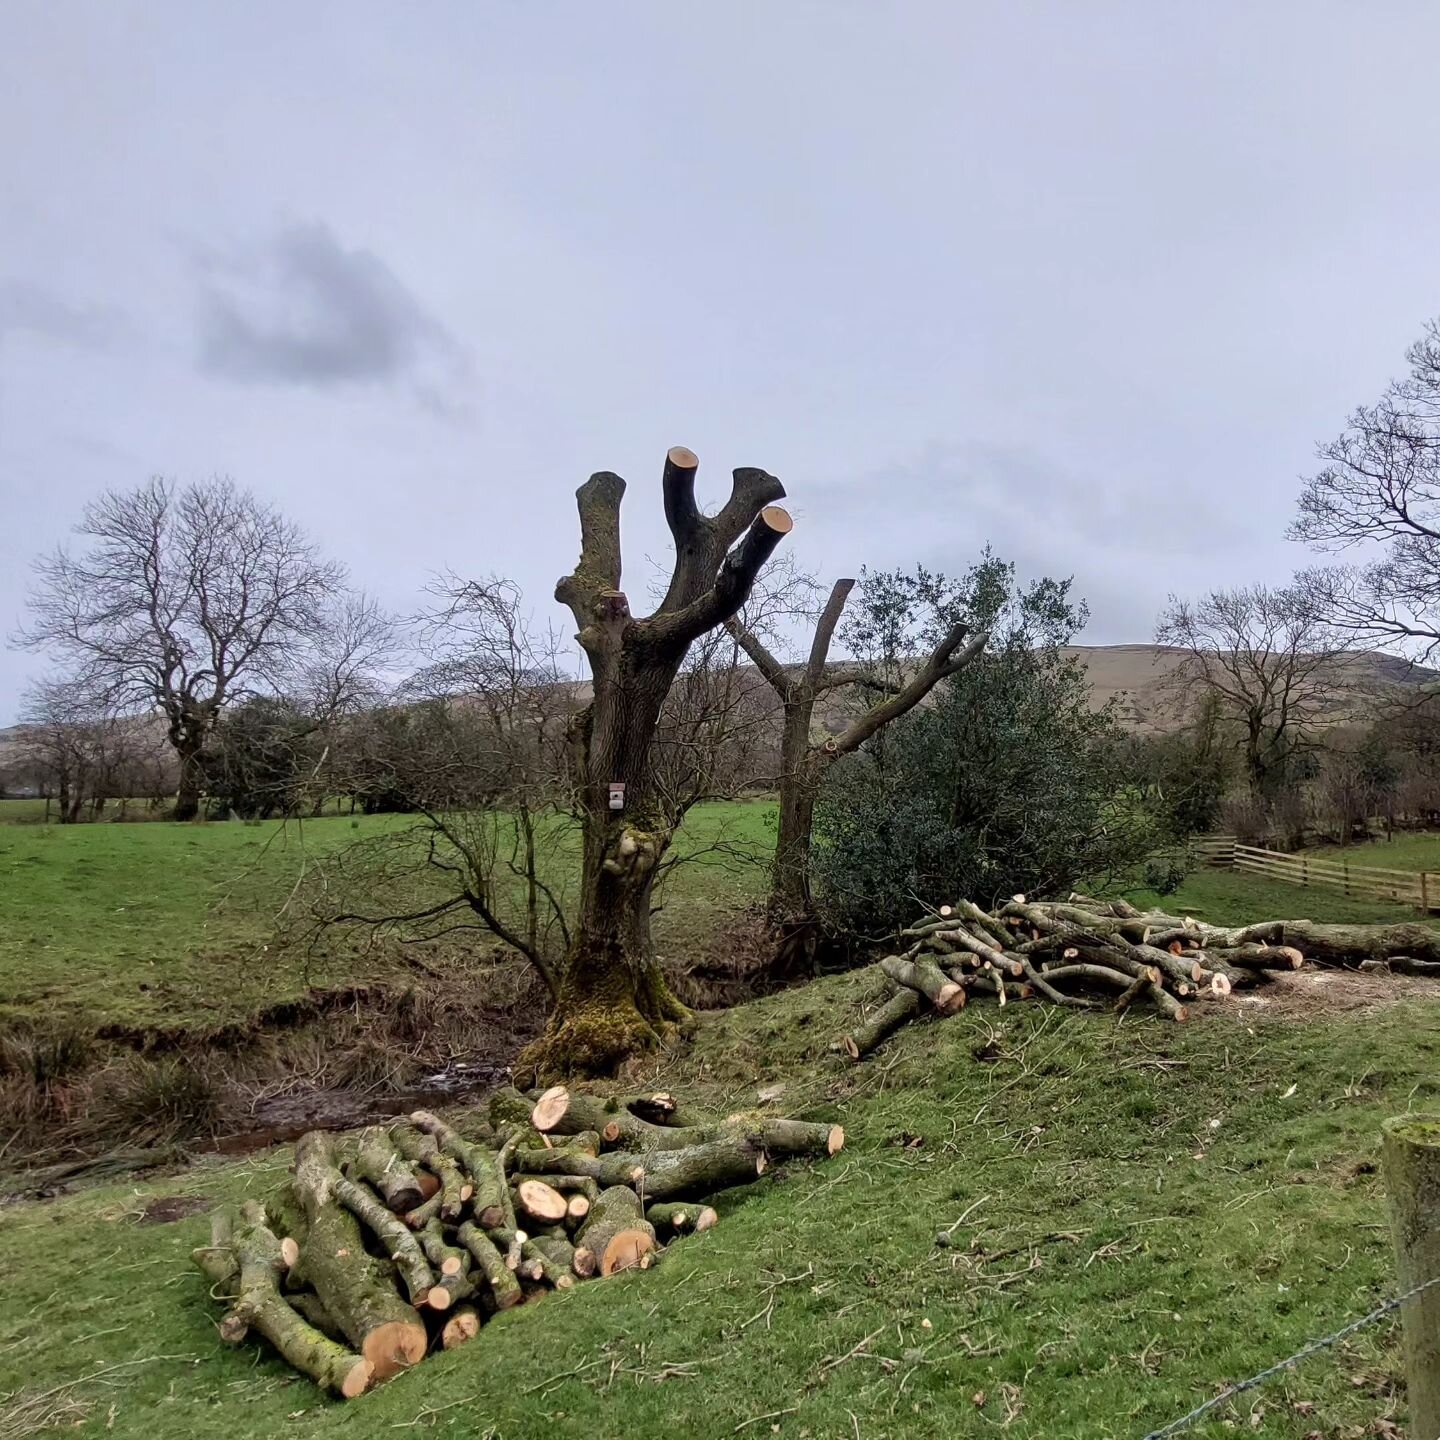 Couple more ADB pollards in Edale for @peakdistrictnt using the truck winch as the tractors not been delivered yet. #treework #ashdieback #arboricultural #arborist #peakdistrict #Edale #hopevalley #timber #winching